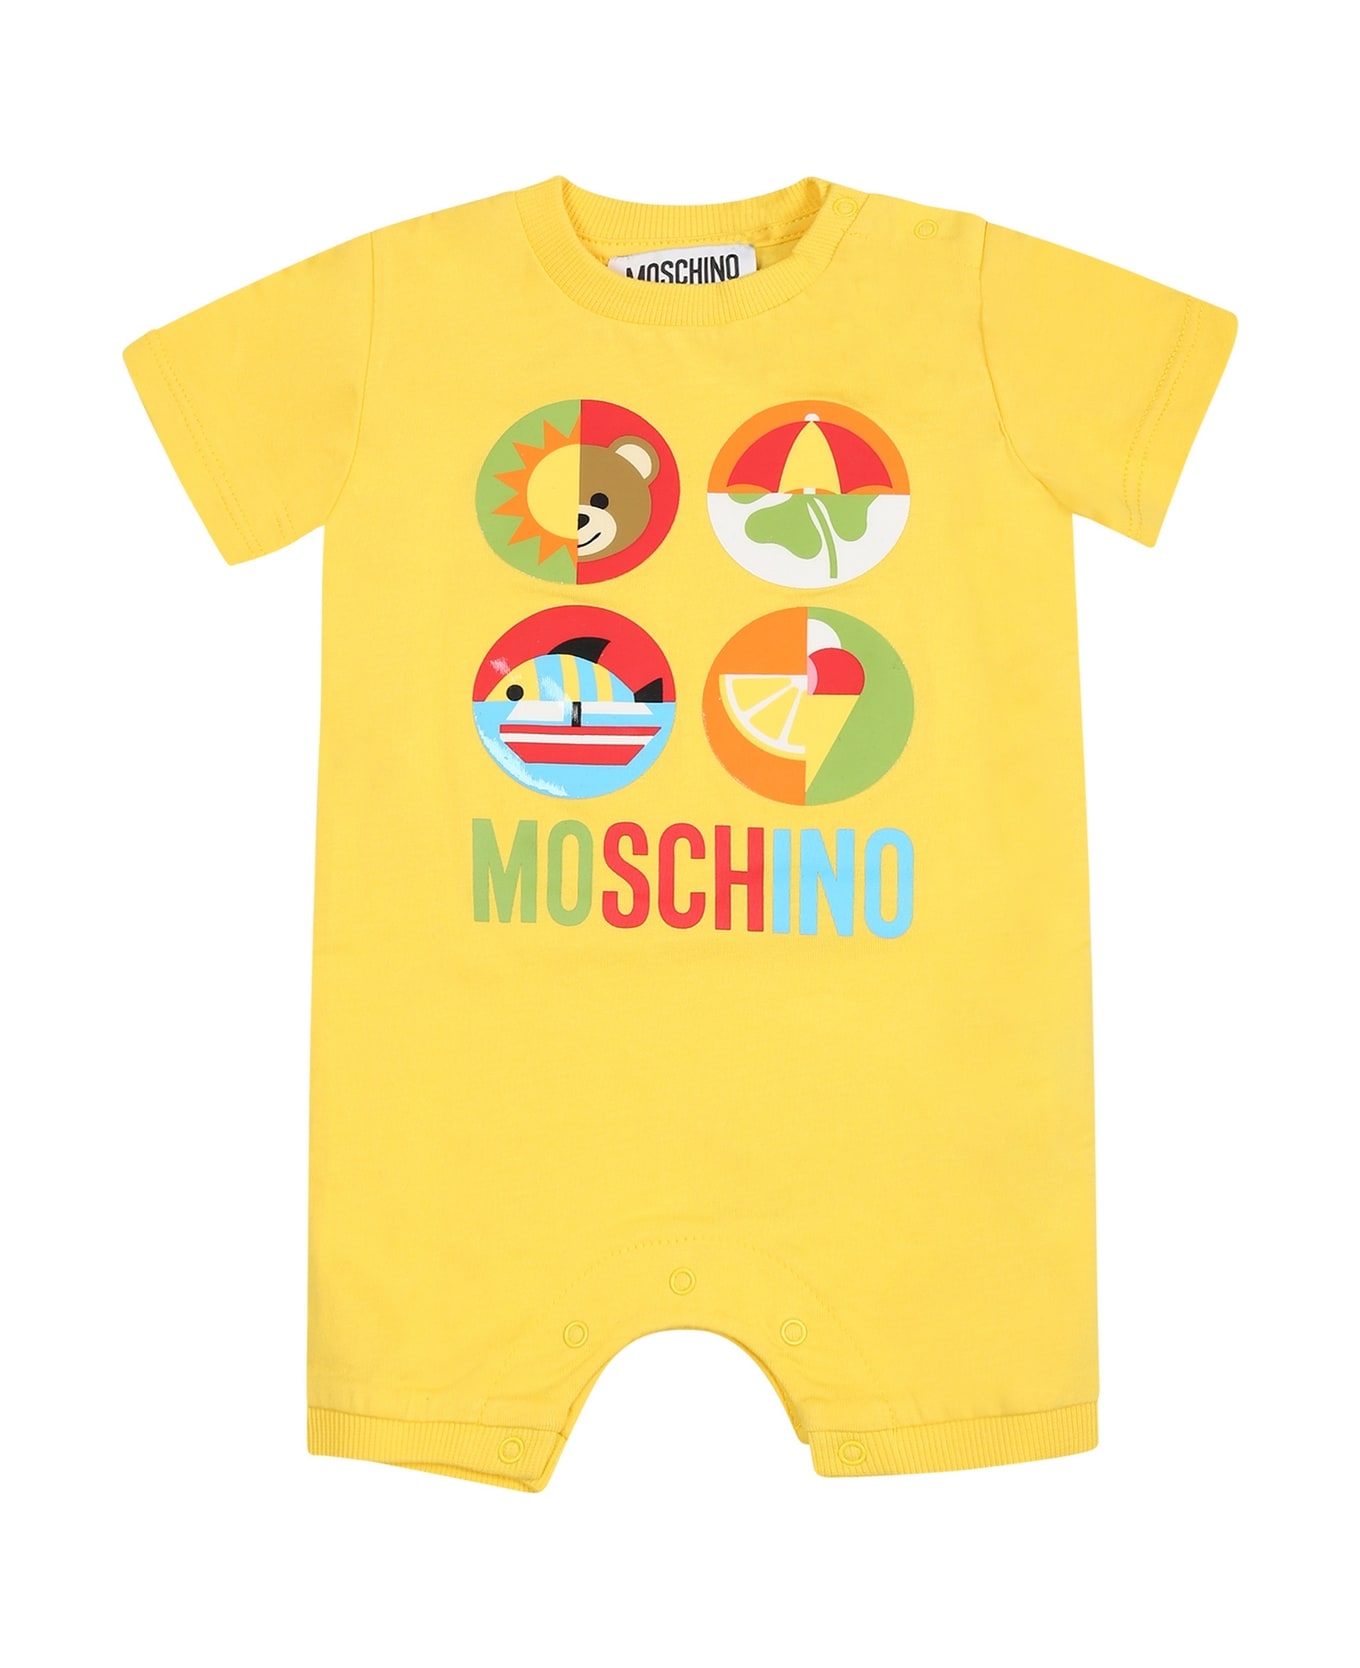 Moschino Yellow Romper For Baby Boy With Logo And Print - Yellow